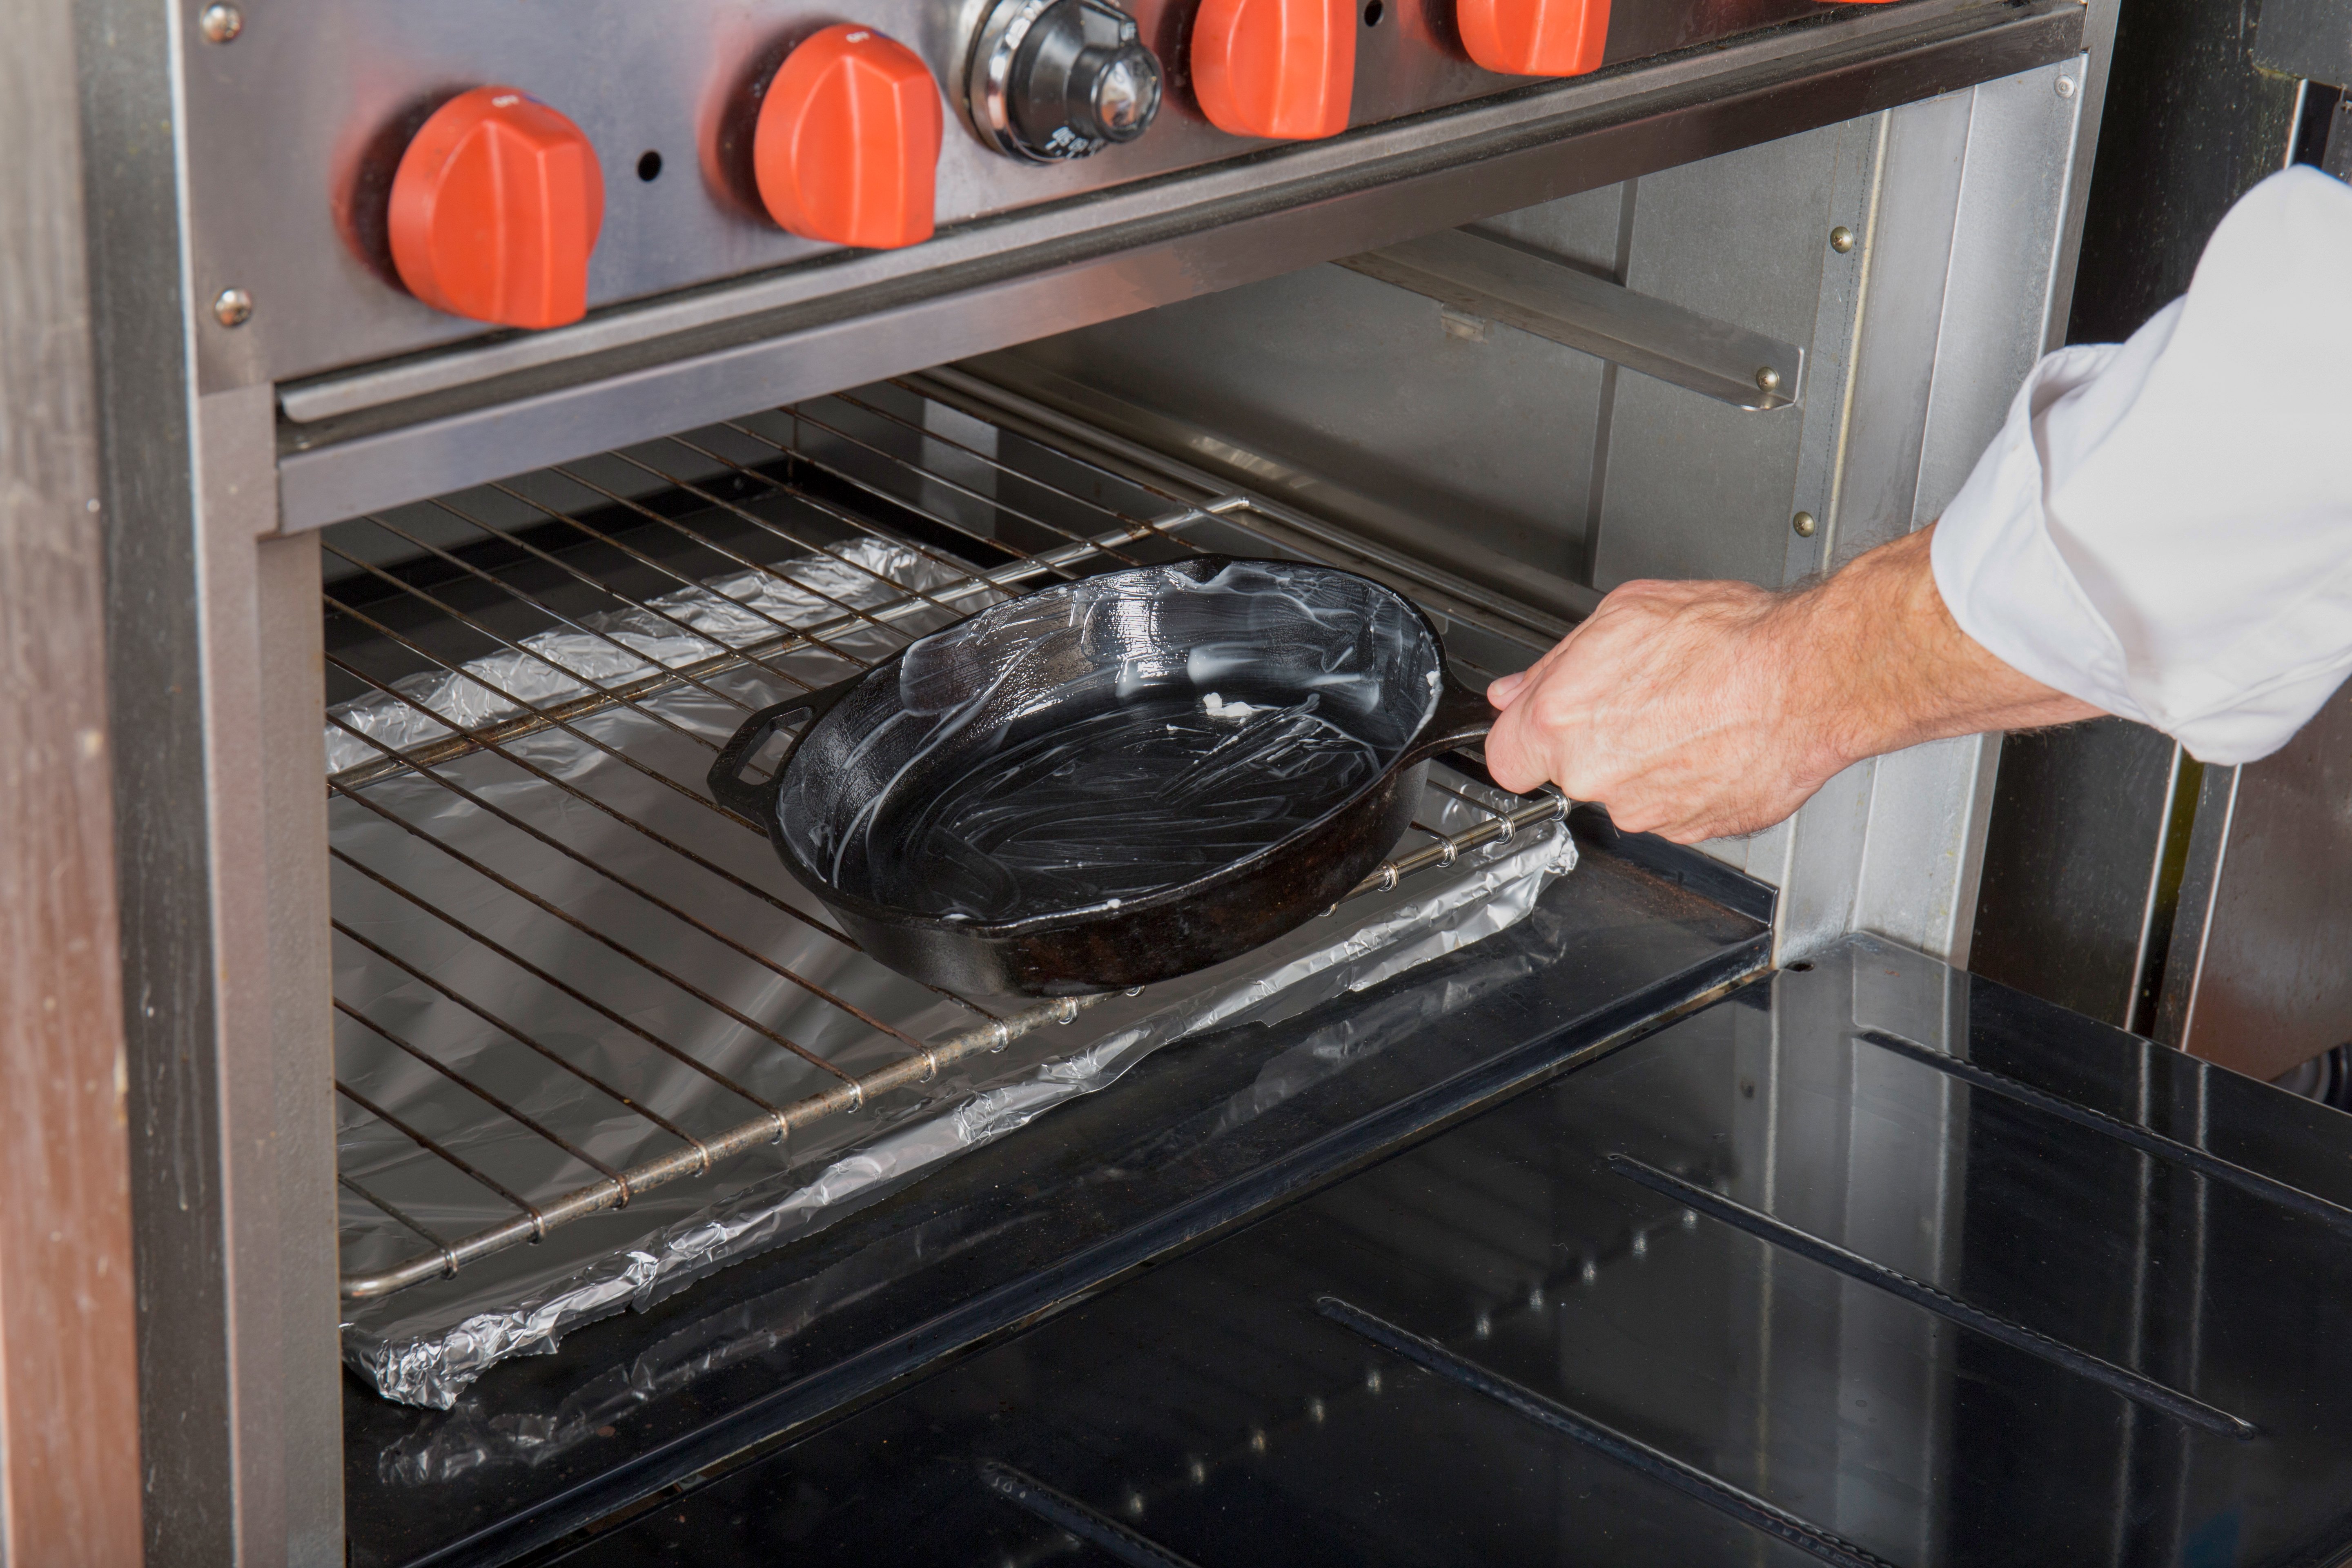 Chef placing a seasoned cast iron pan into a preheated oven